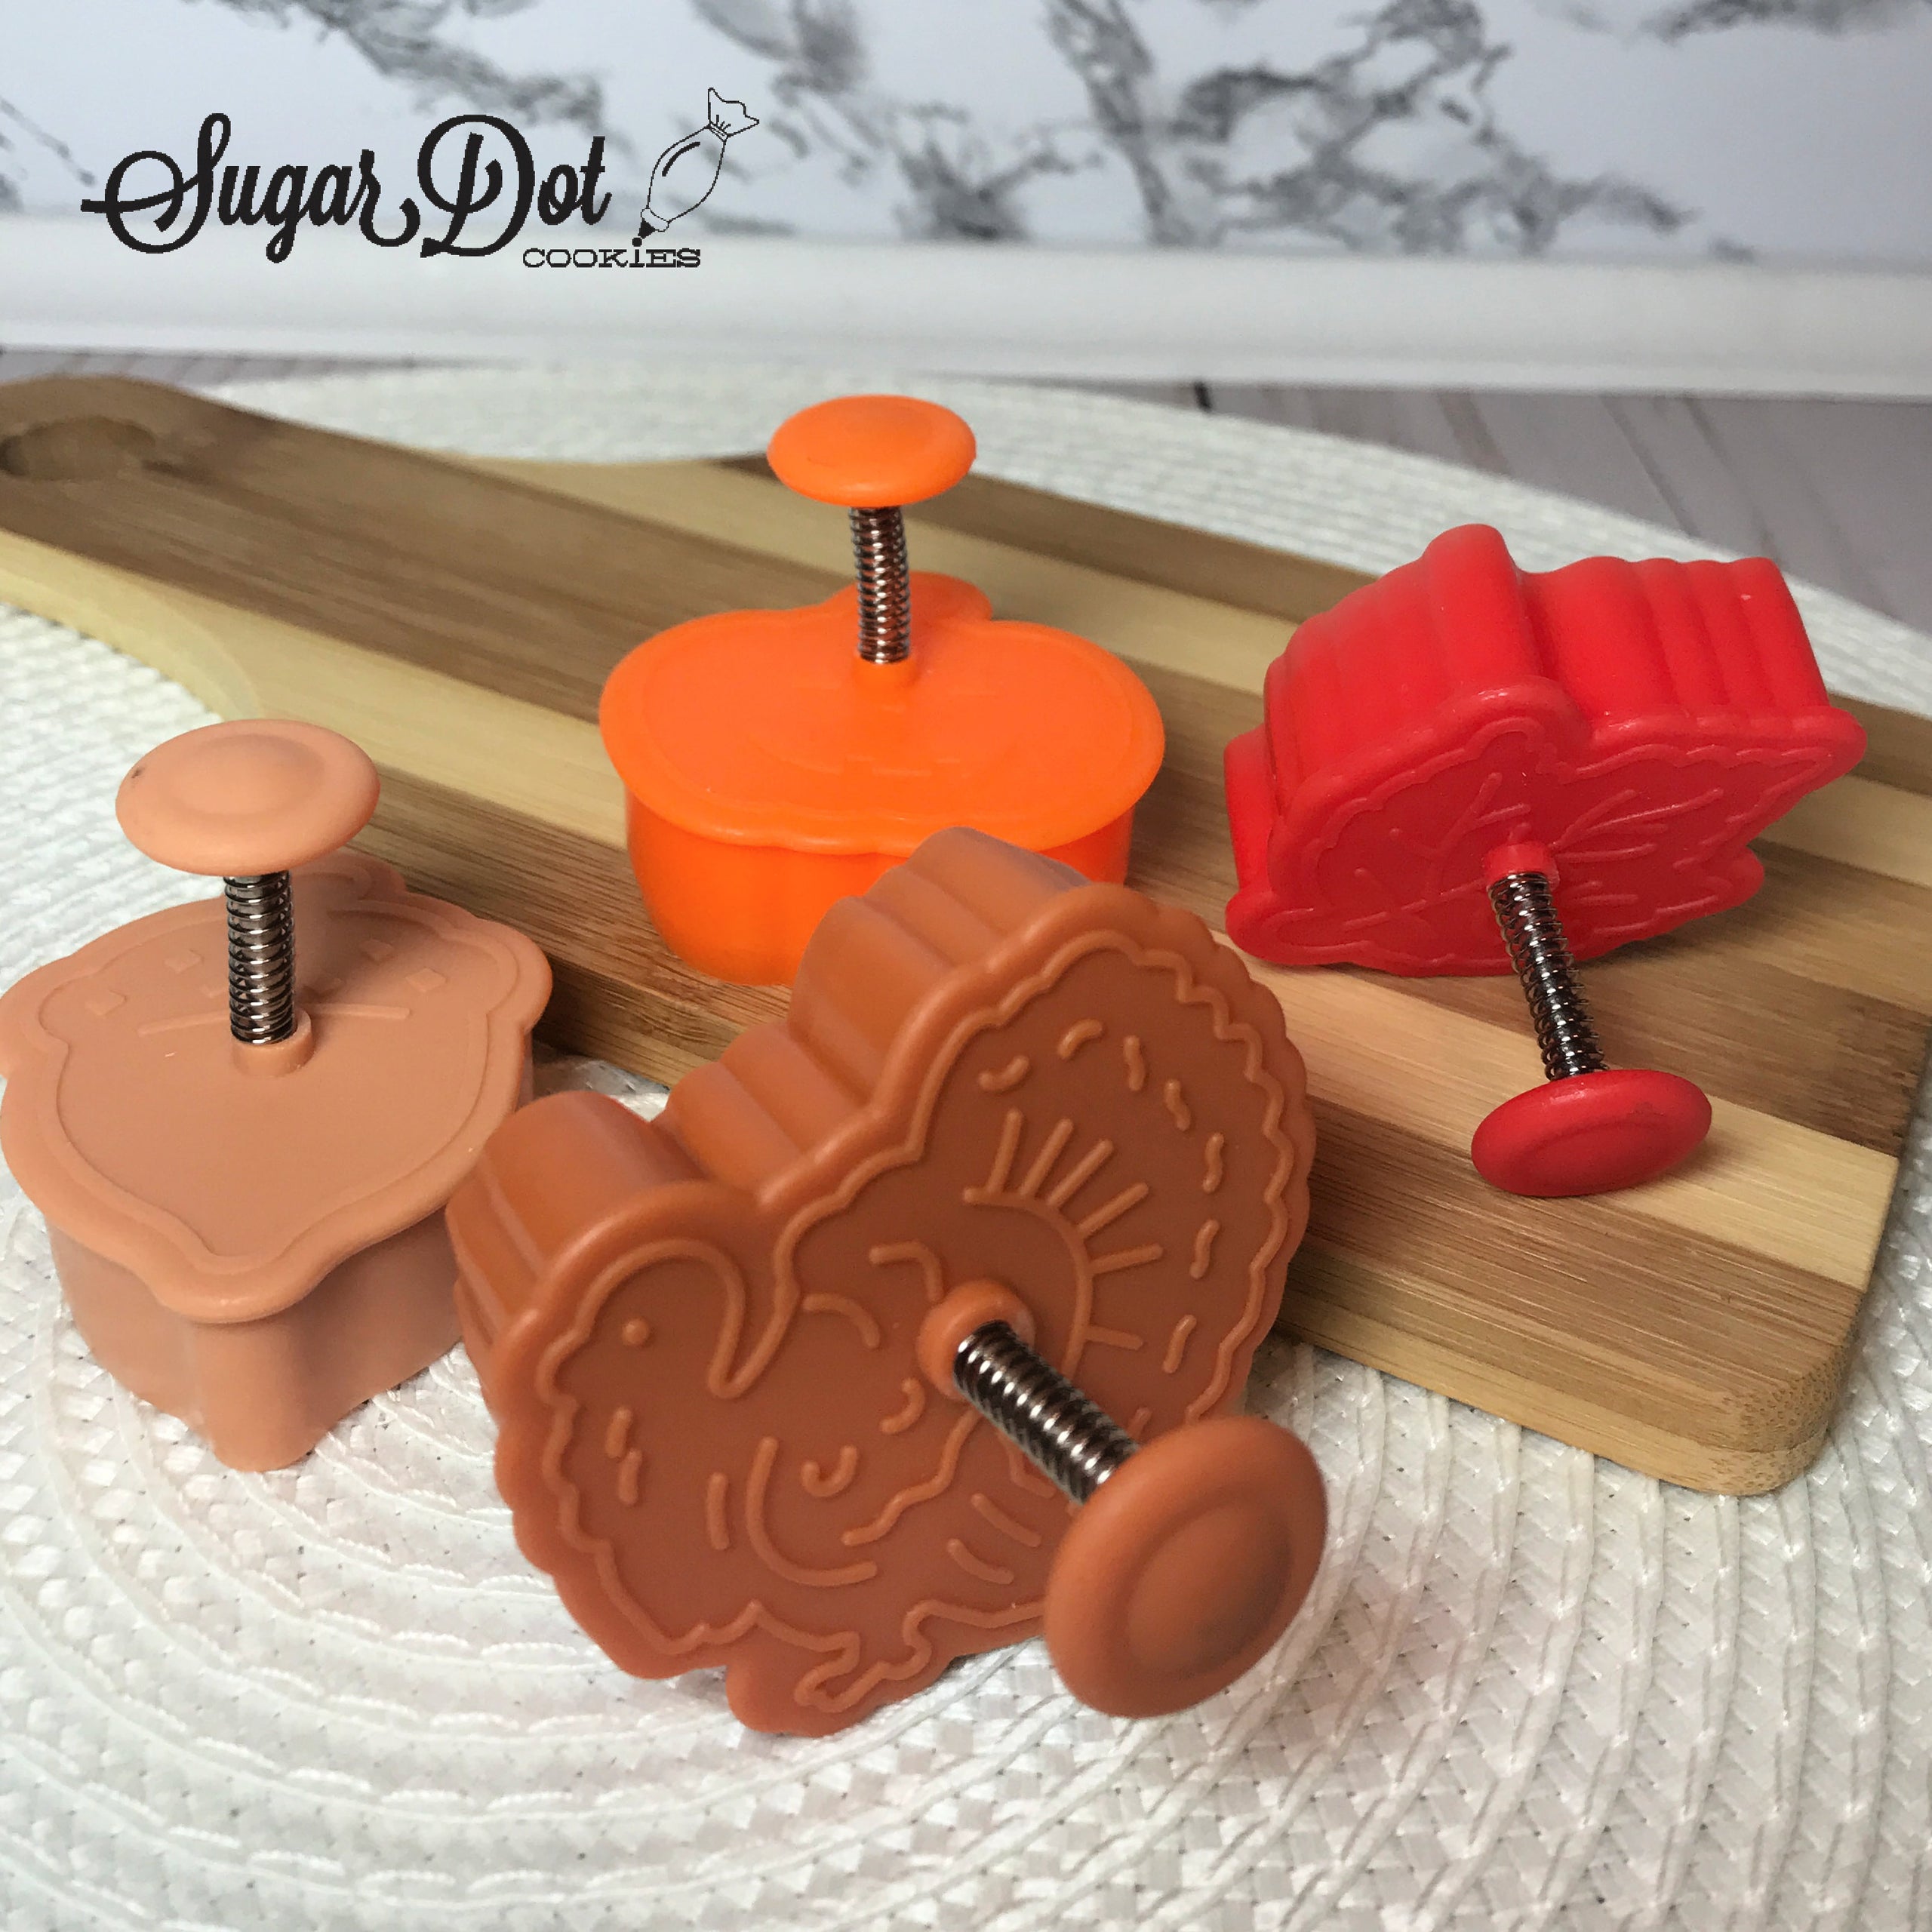 Mini plunger imprint cutters for cookies, pie crust and fondant